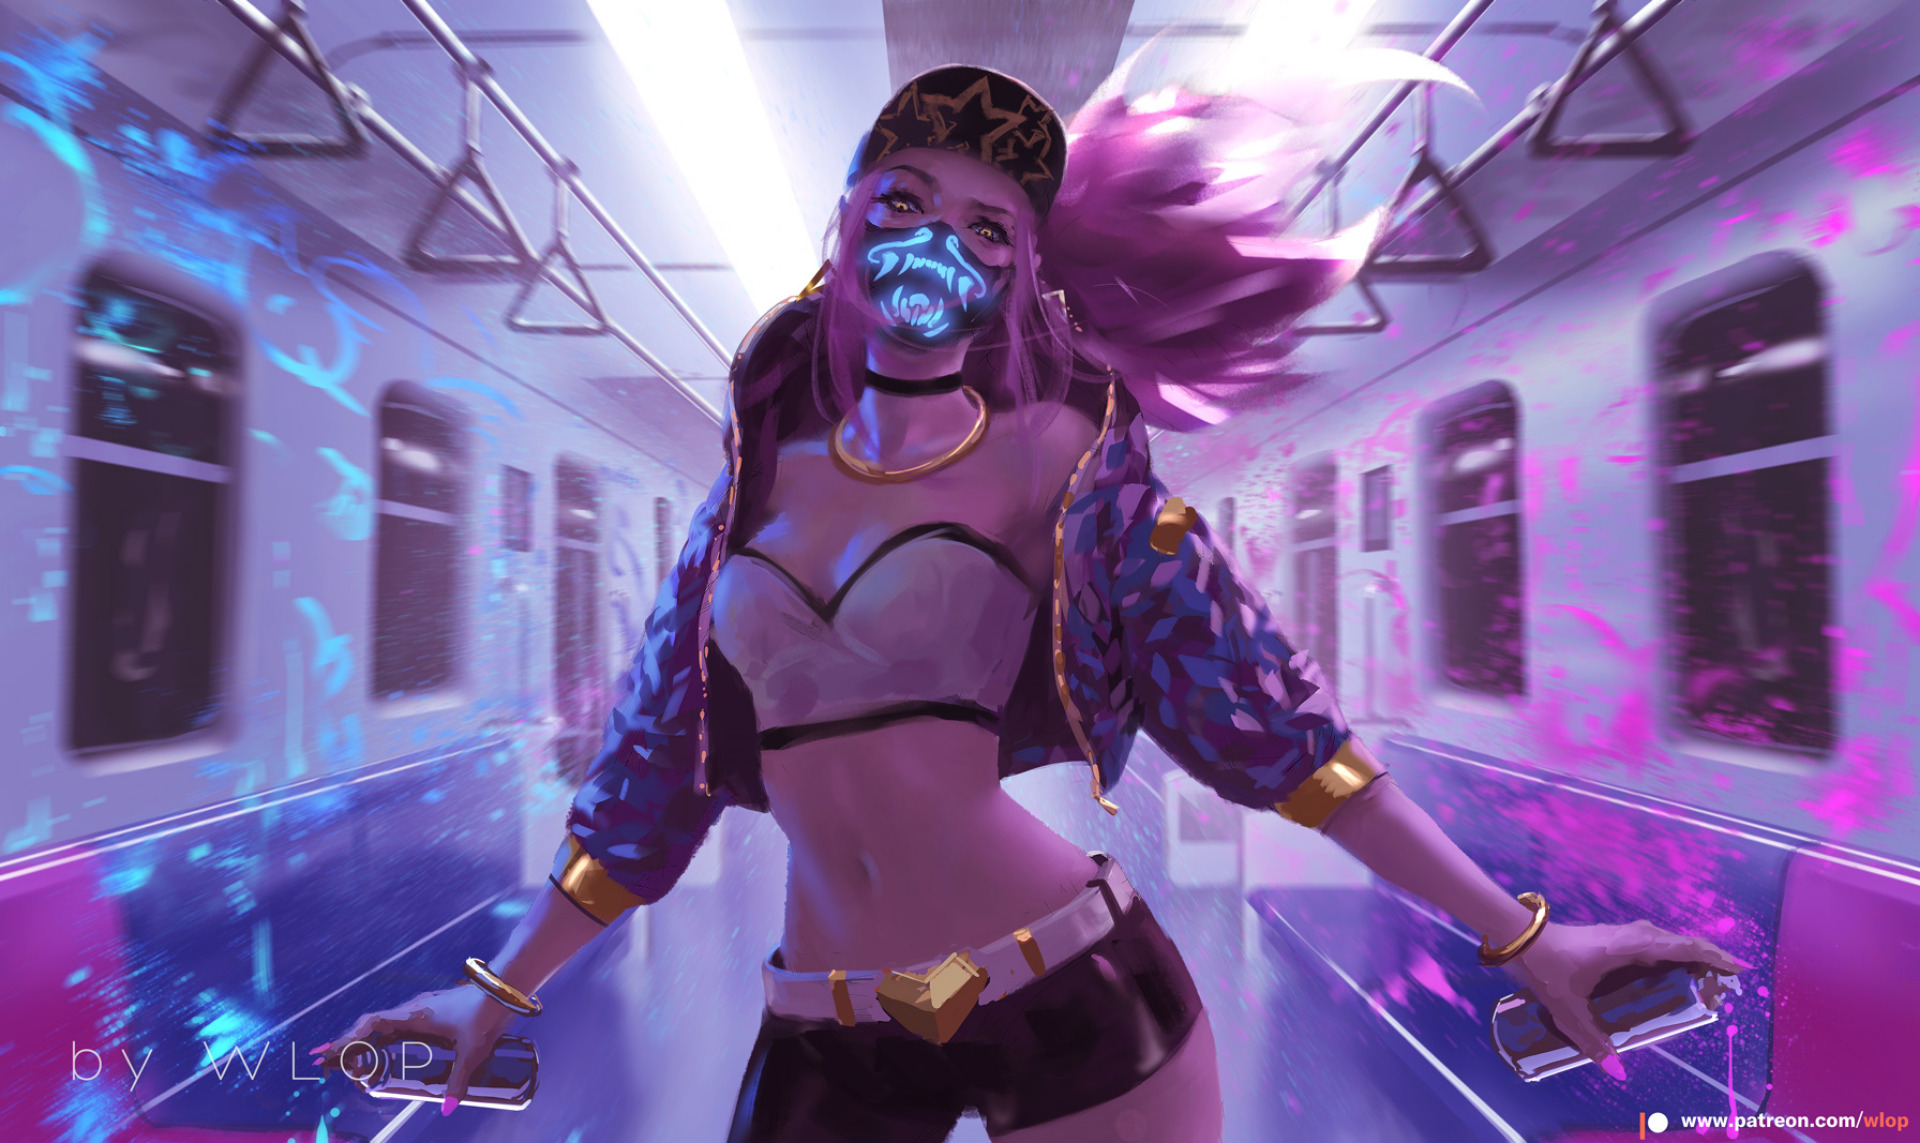 Anime 1920x1143 League of Legends women video games PC gaming video game art fan art video game girls video game characters mask WLOP watermarked subway